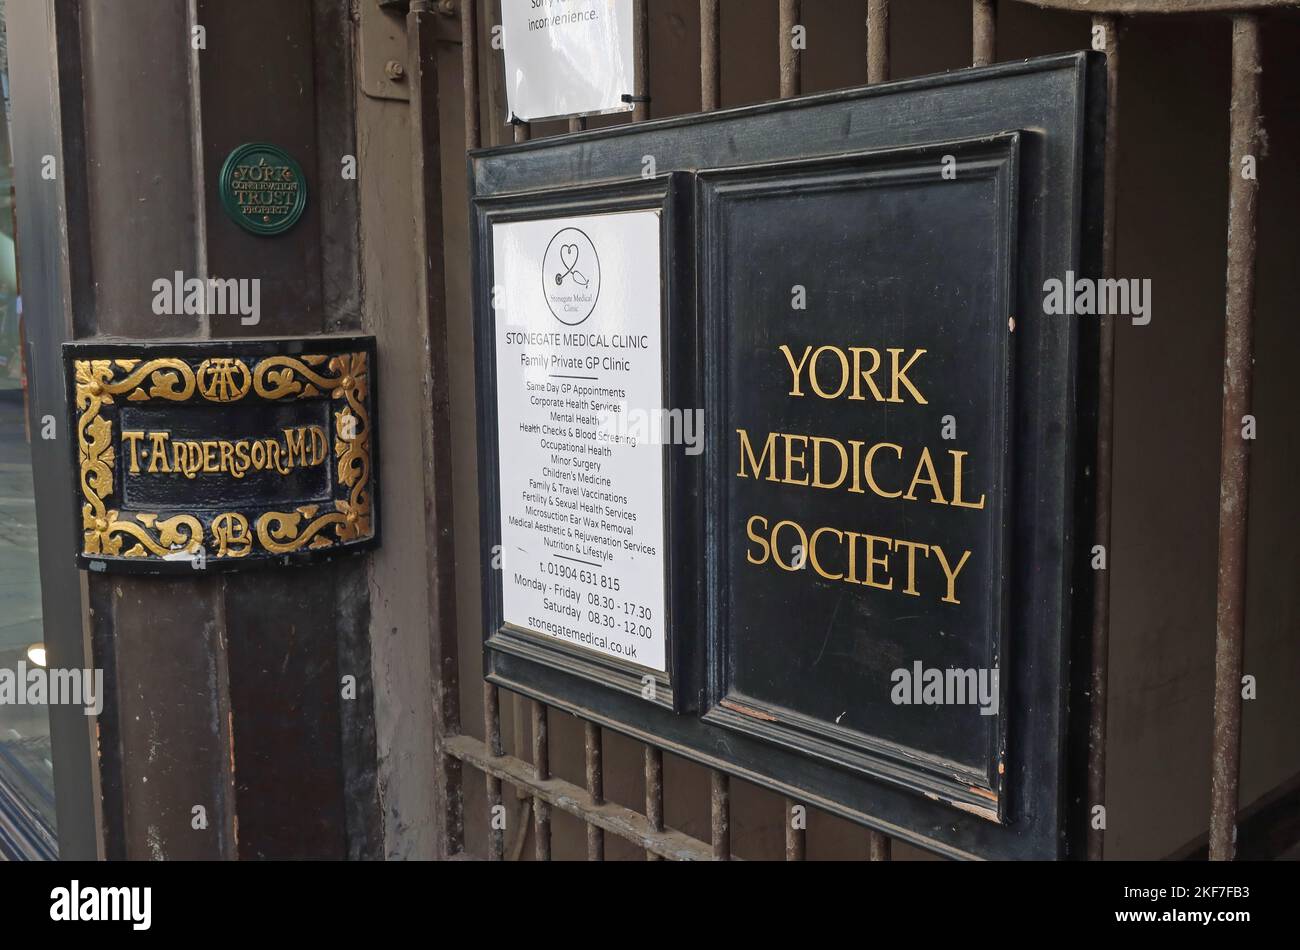 York Medical Society, T Anderson MD Sign on building, 23 Stonegate St, York, Yorkshire, Angleterre, ROYAUME-UNI, YO1 8AW Banque D'Images